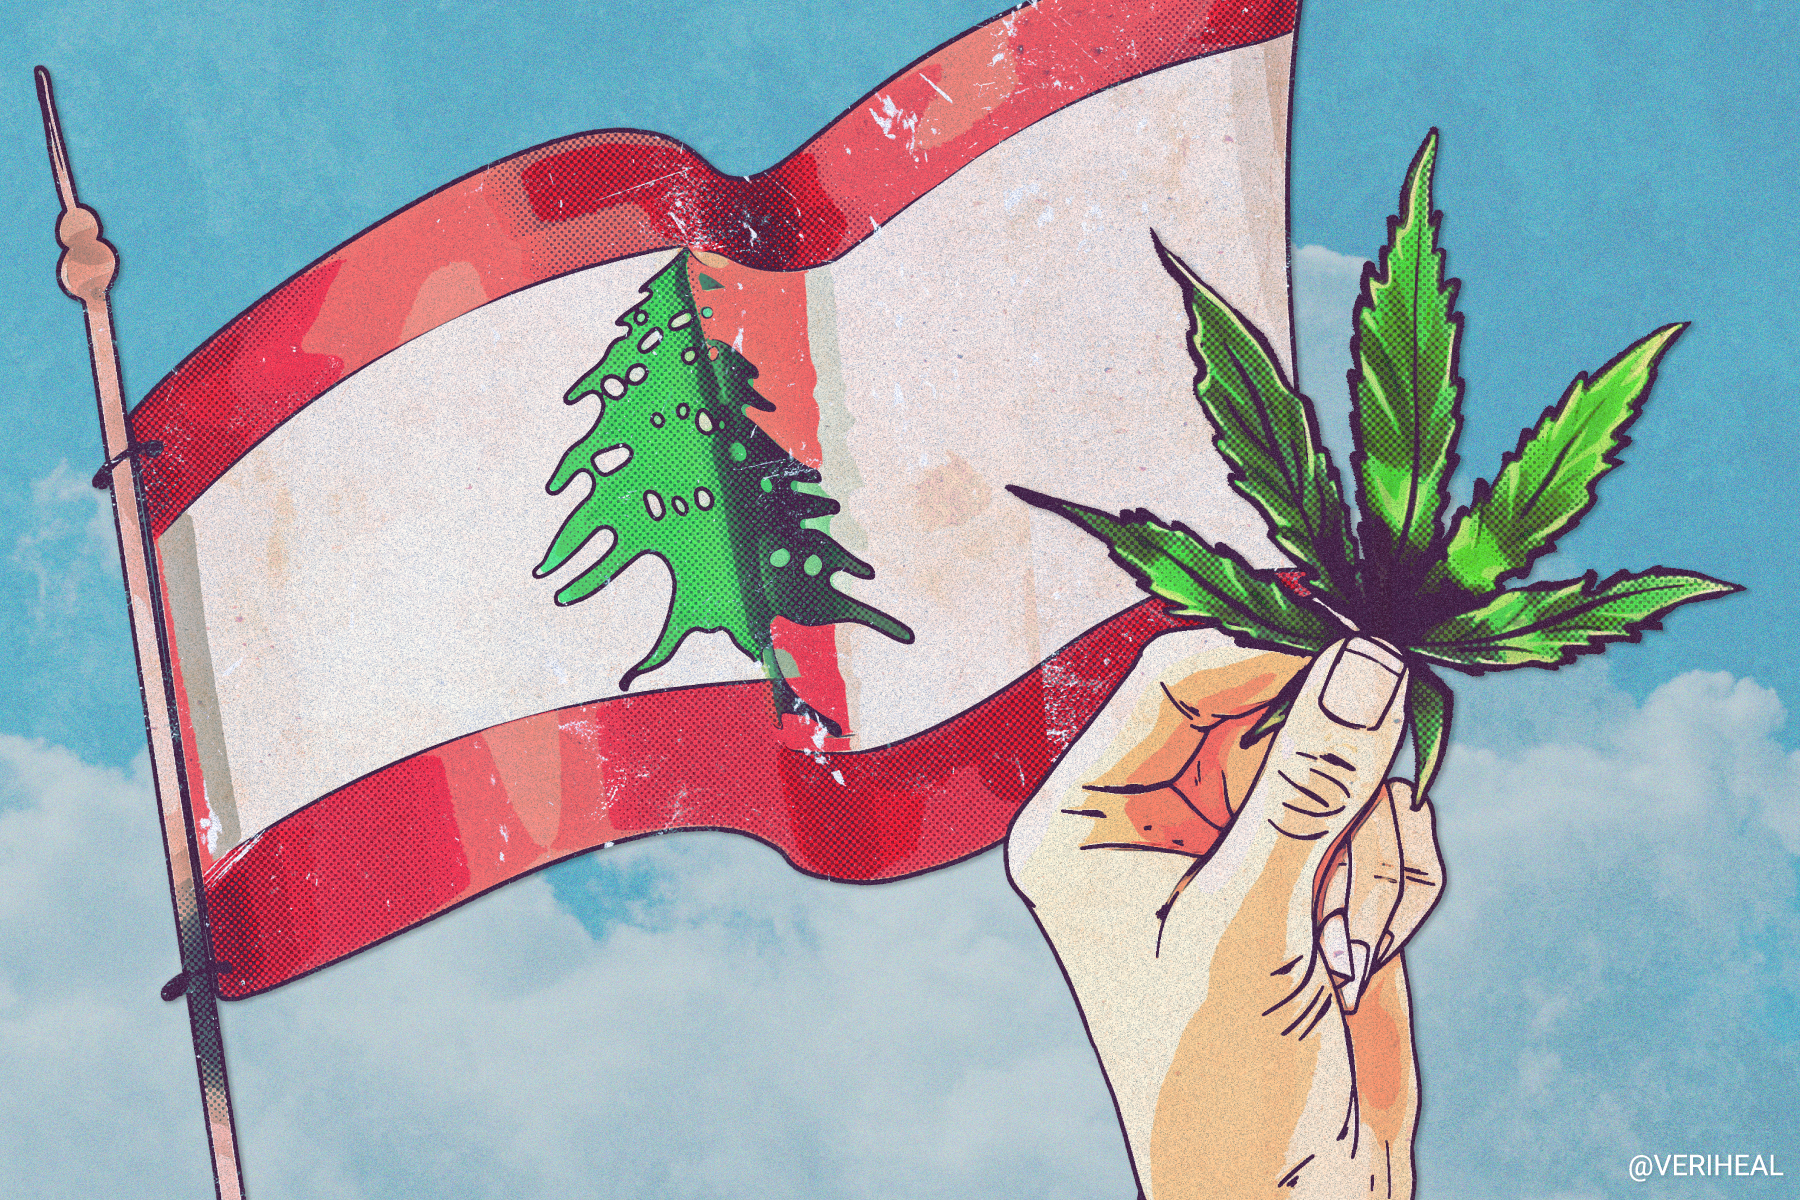 Lebanon Pushes for Activation of Medical Cannabis Law, Piquing Export Interest